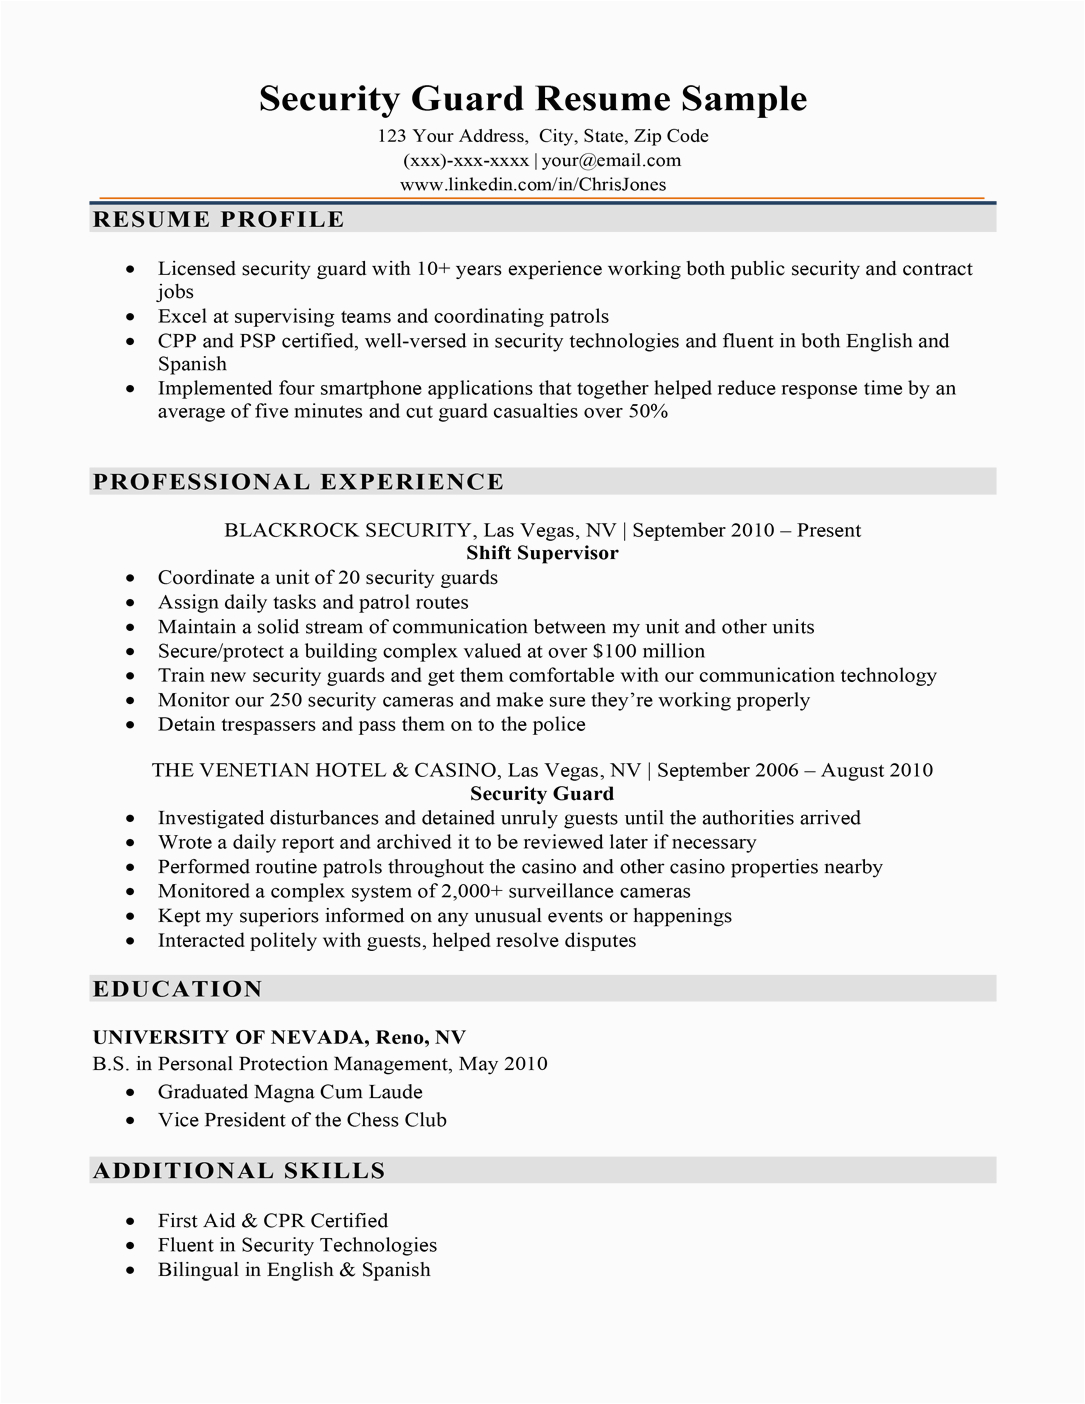 Sample Resume Objective for Security Guard Security Guard Resume Sample & Writing Tips